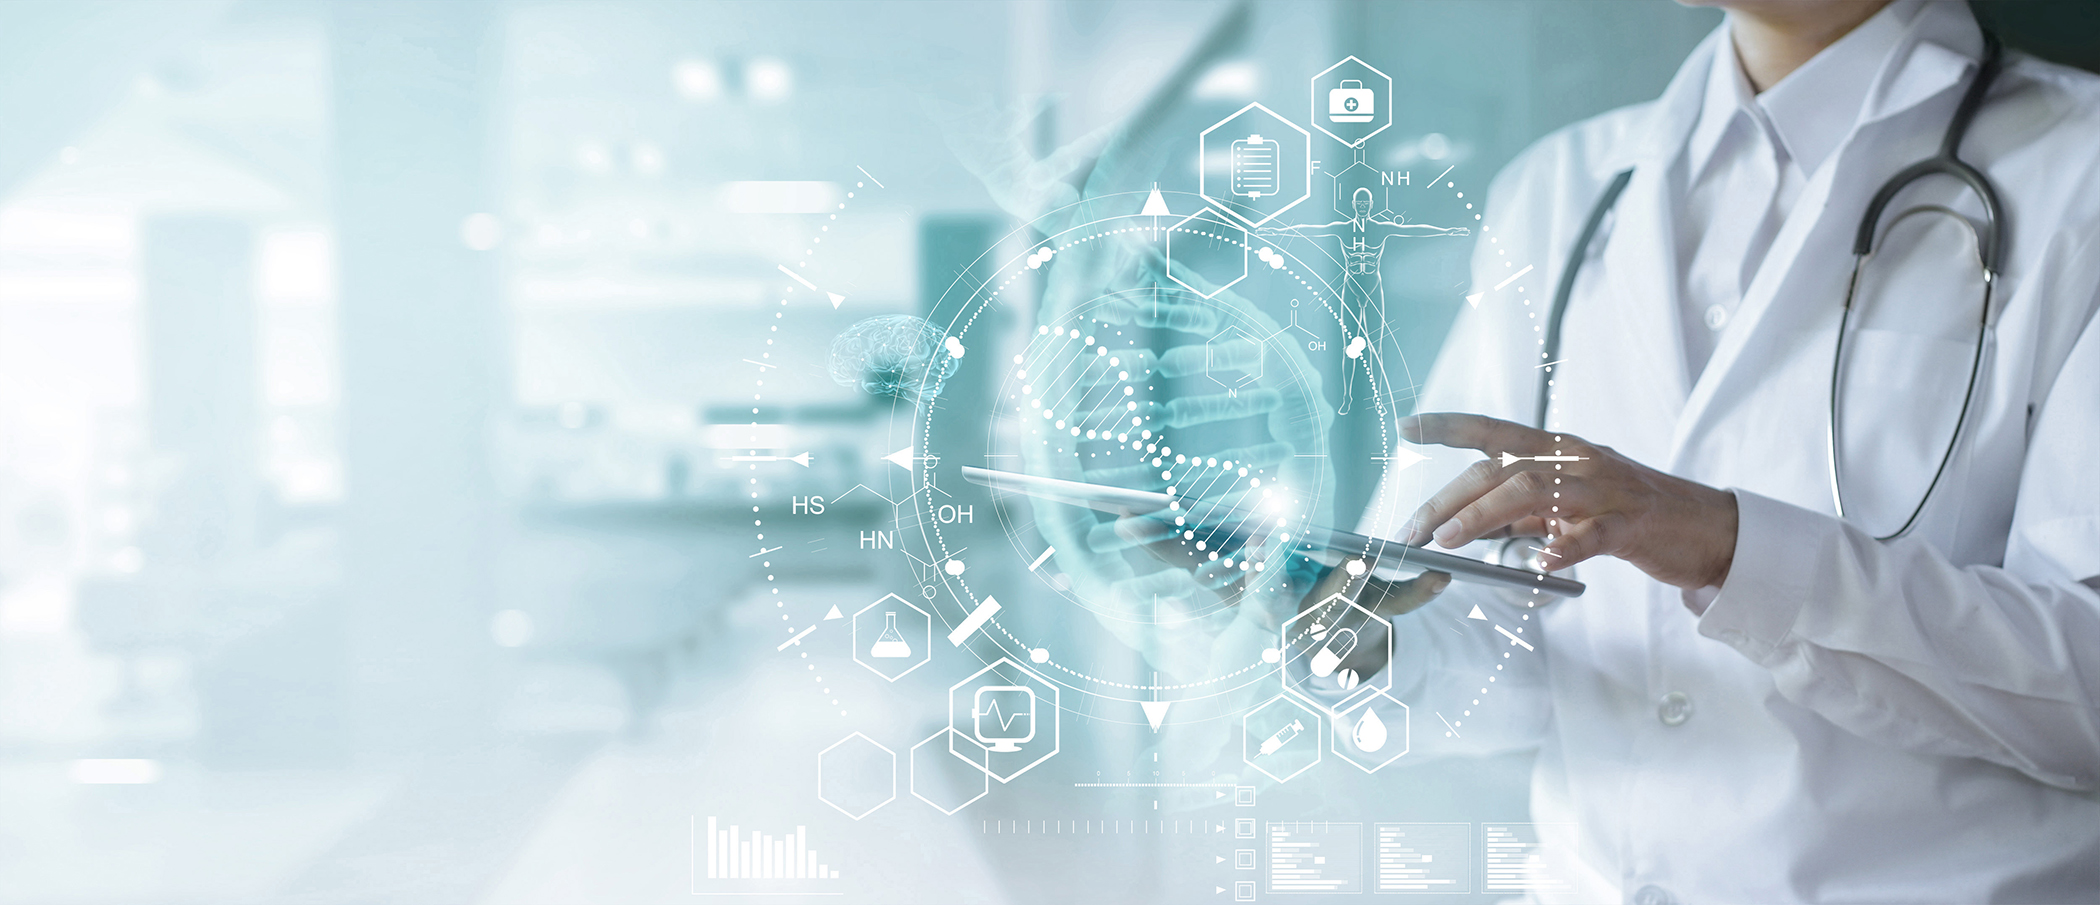 Pharmaceutical manufacturers wanting to benefit from smart, connected plants and enterprises can implement them today. (Copyright: iStock/ ipopba)